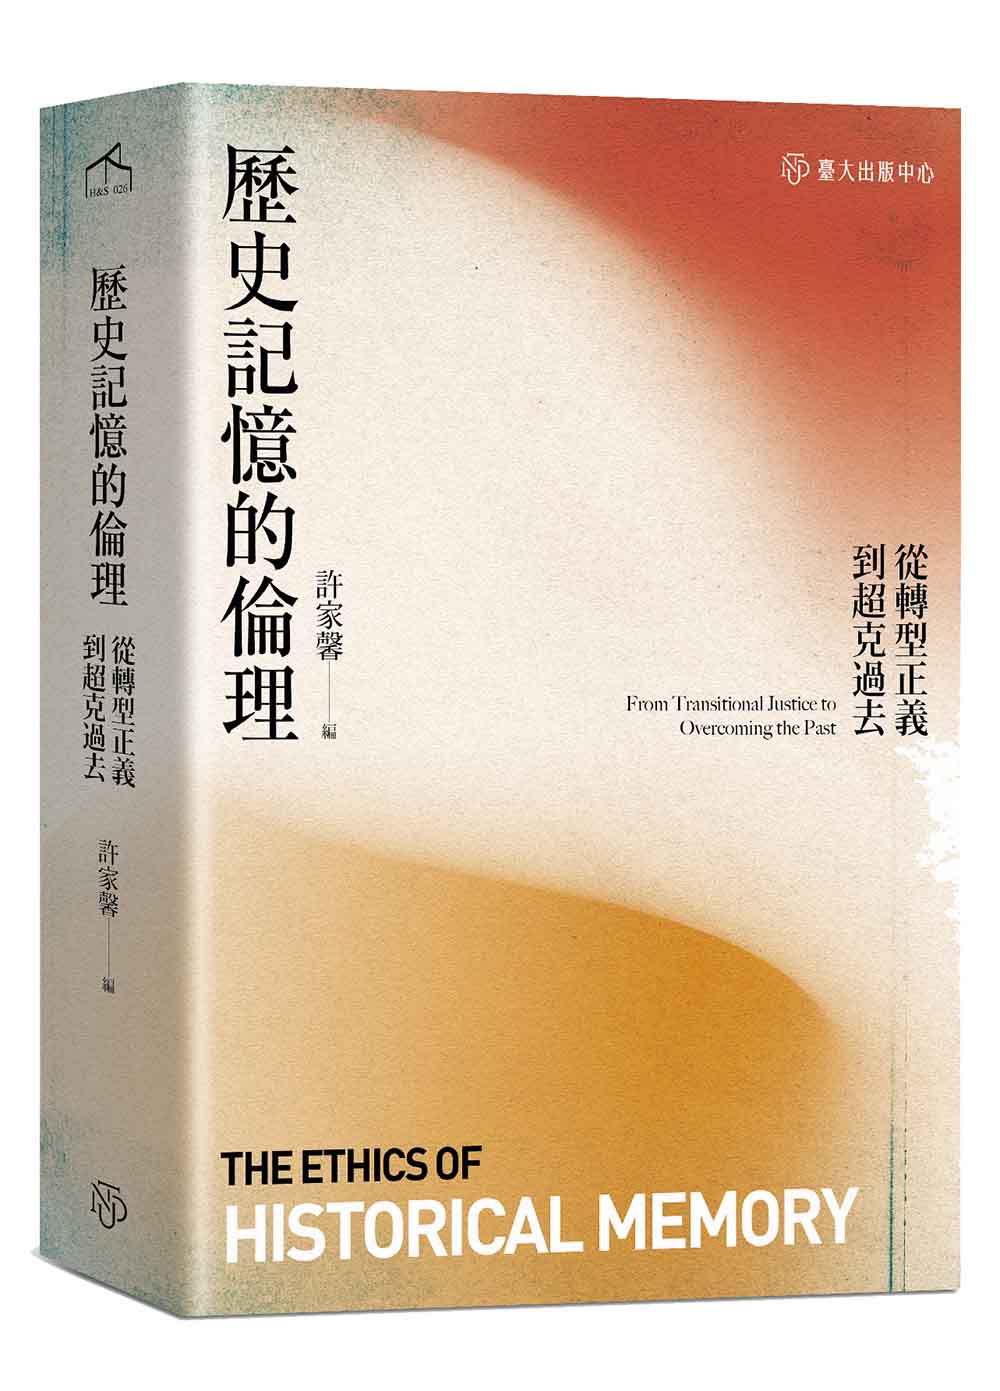 The Ethics of Historical Memory: From Transitional Justice to Overcoming the Past